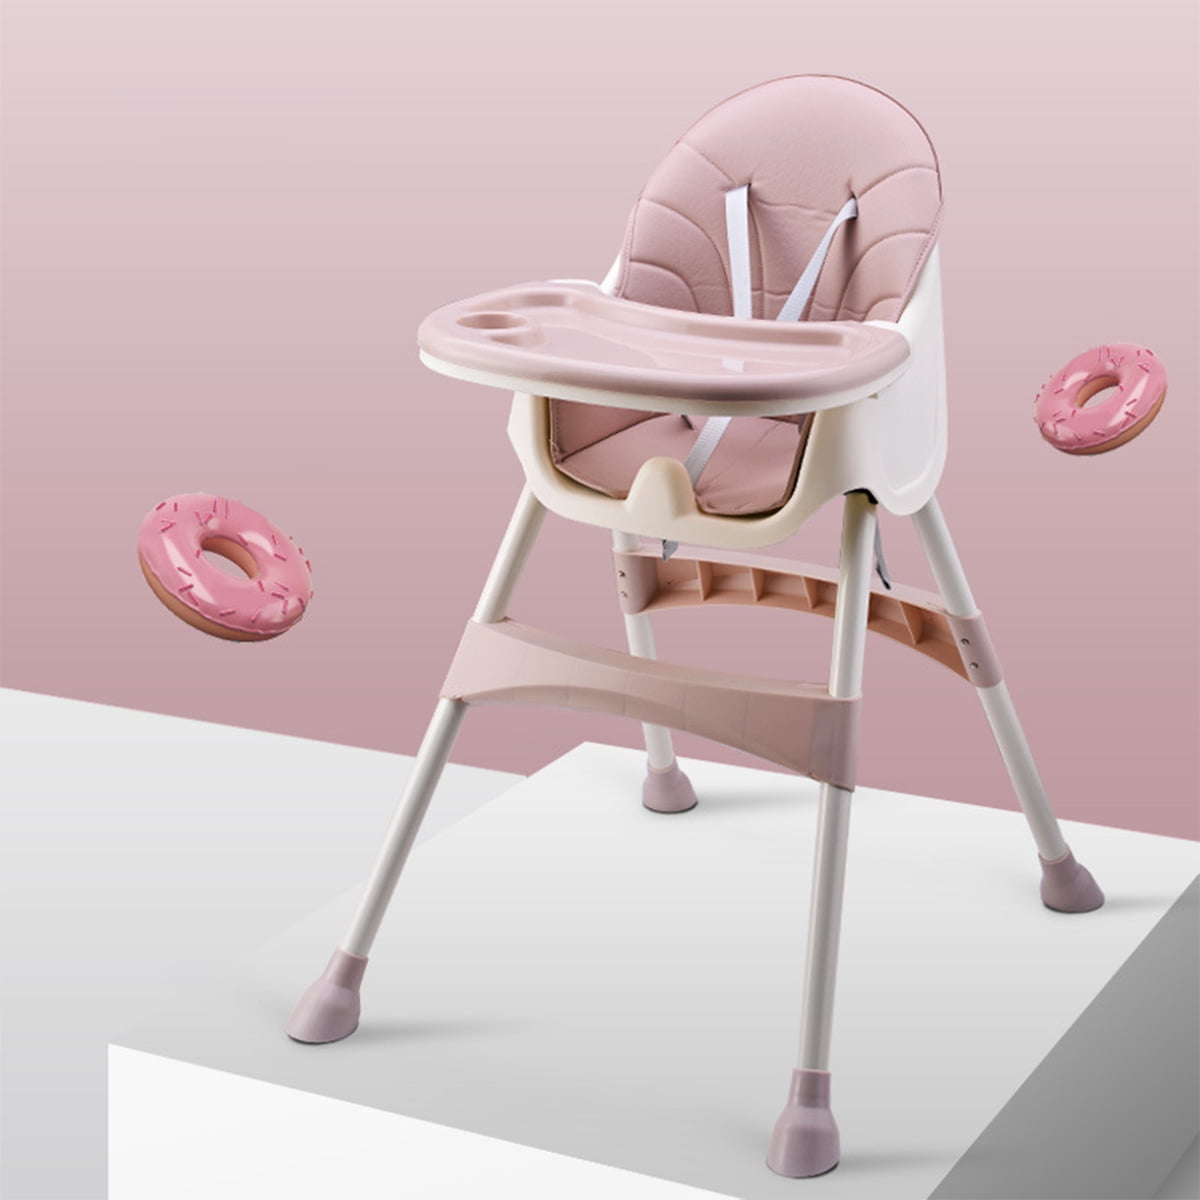 Pink-2 New Portable Baby Chair/High Chair Harness 